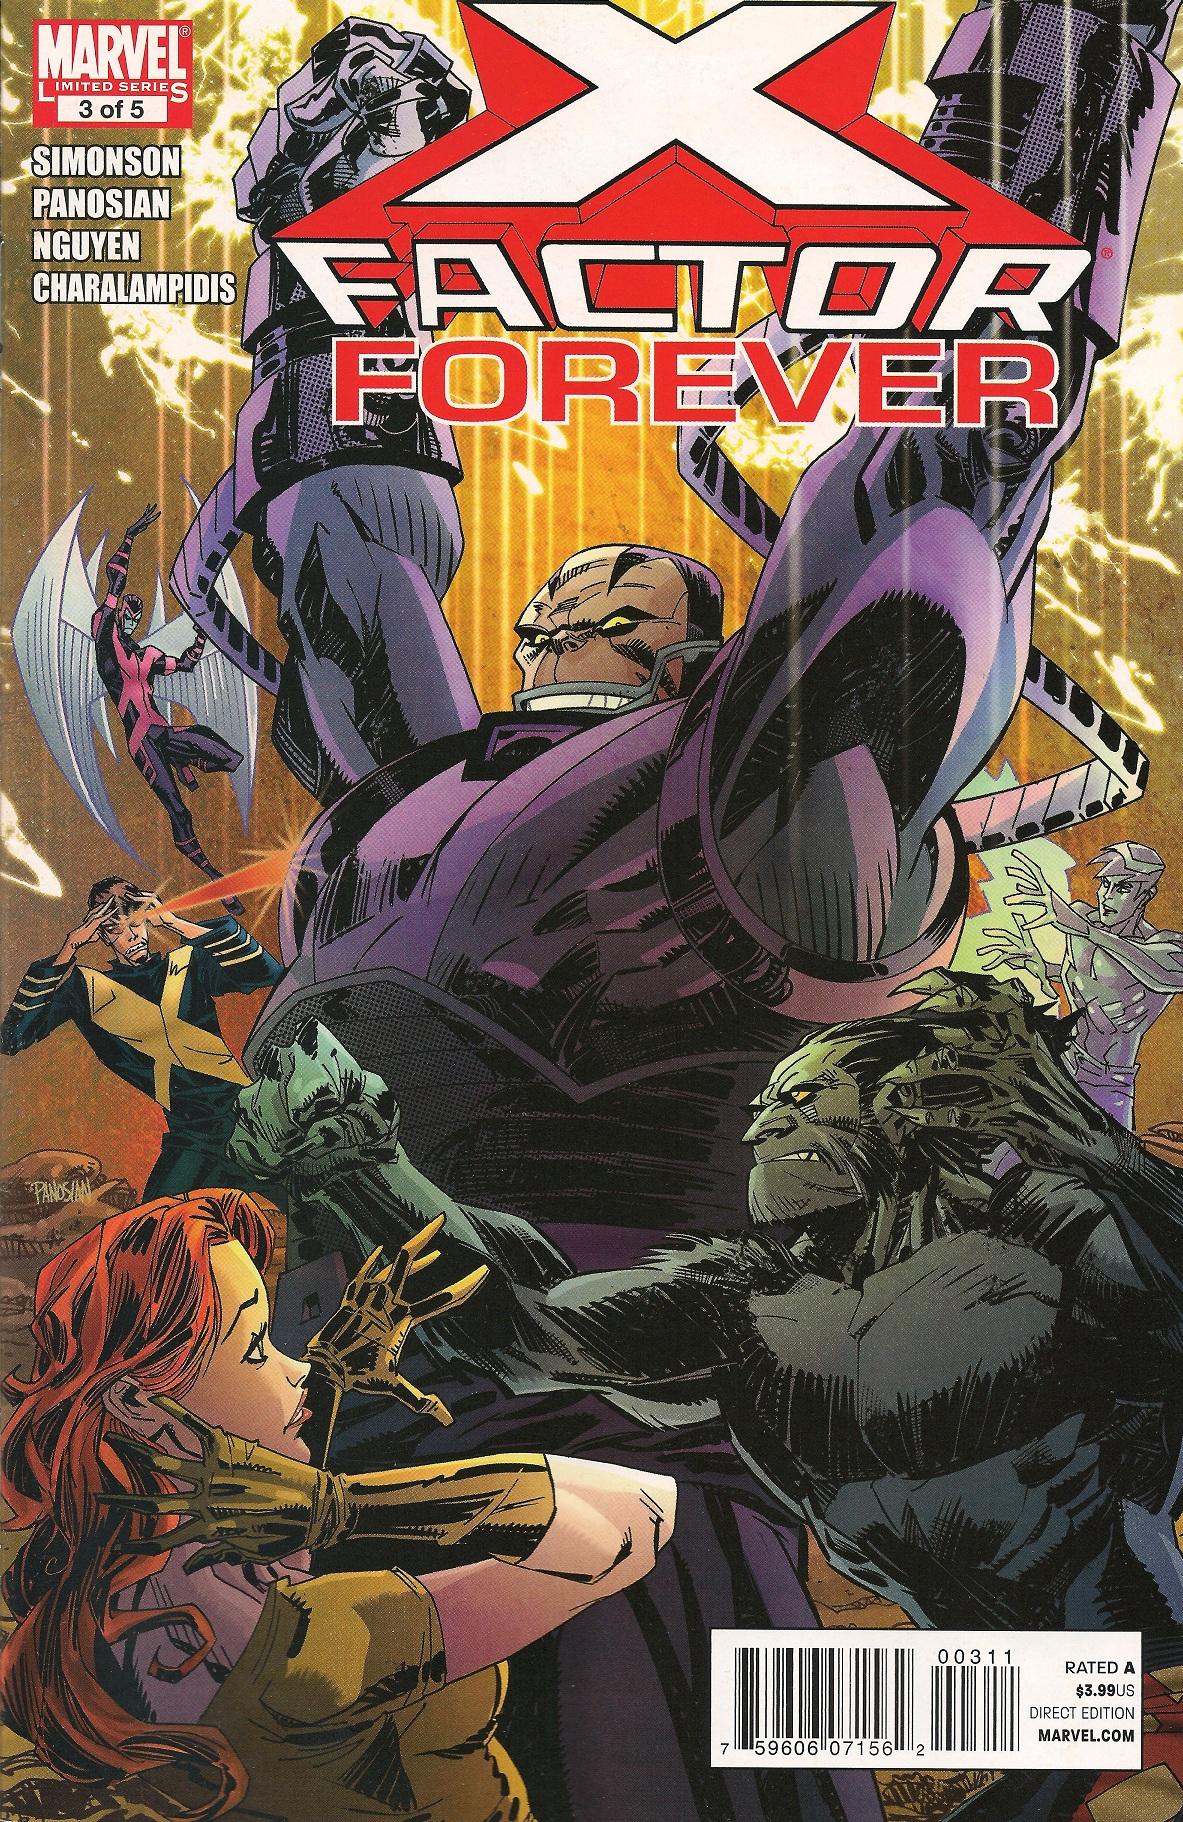 X-Factor Forever Vol. 1 #3